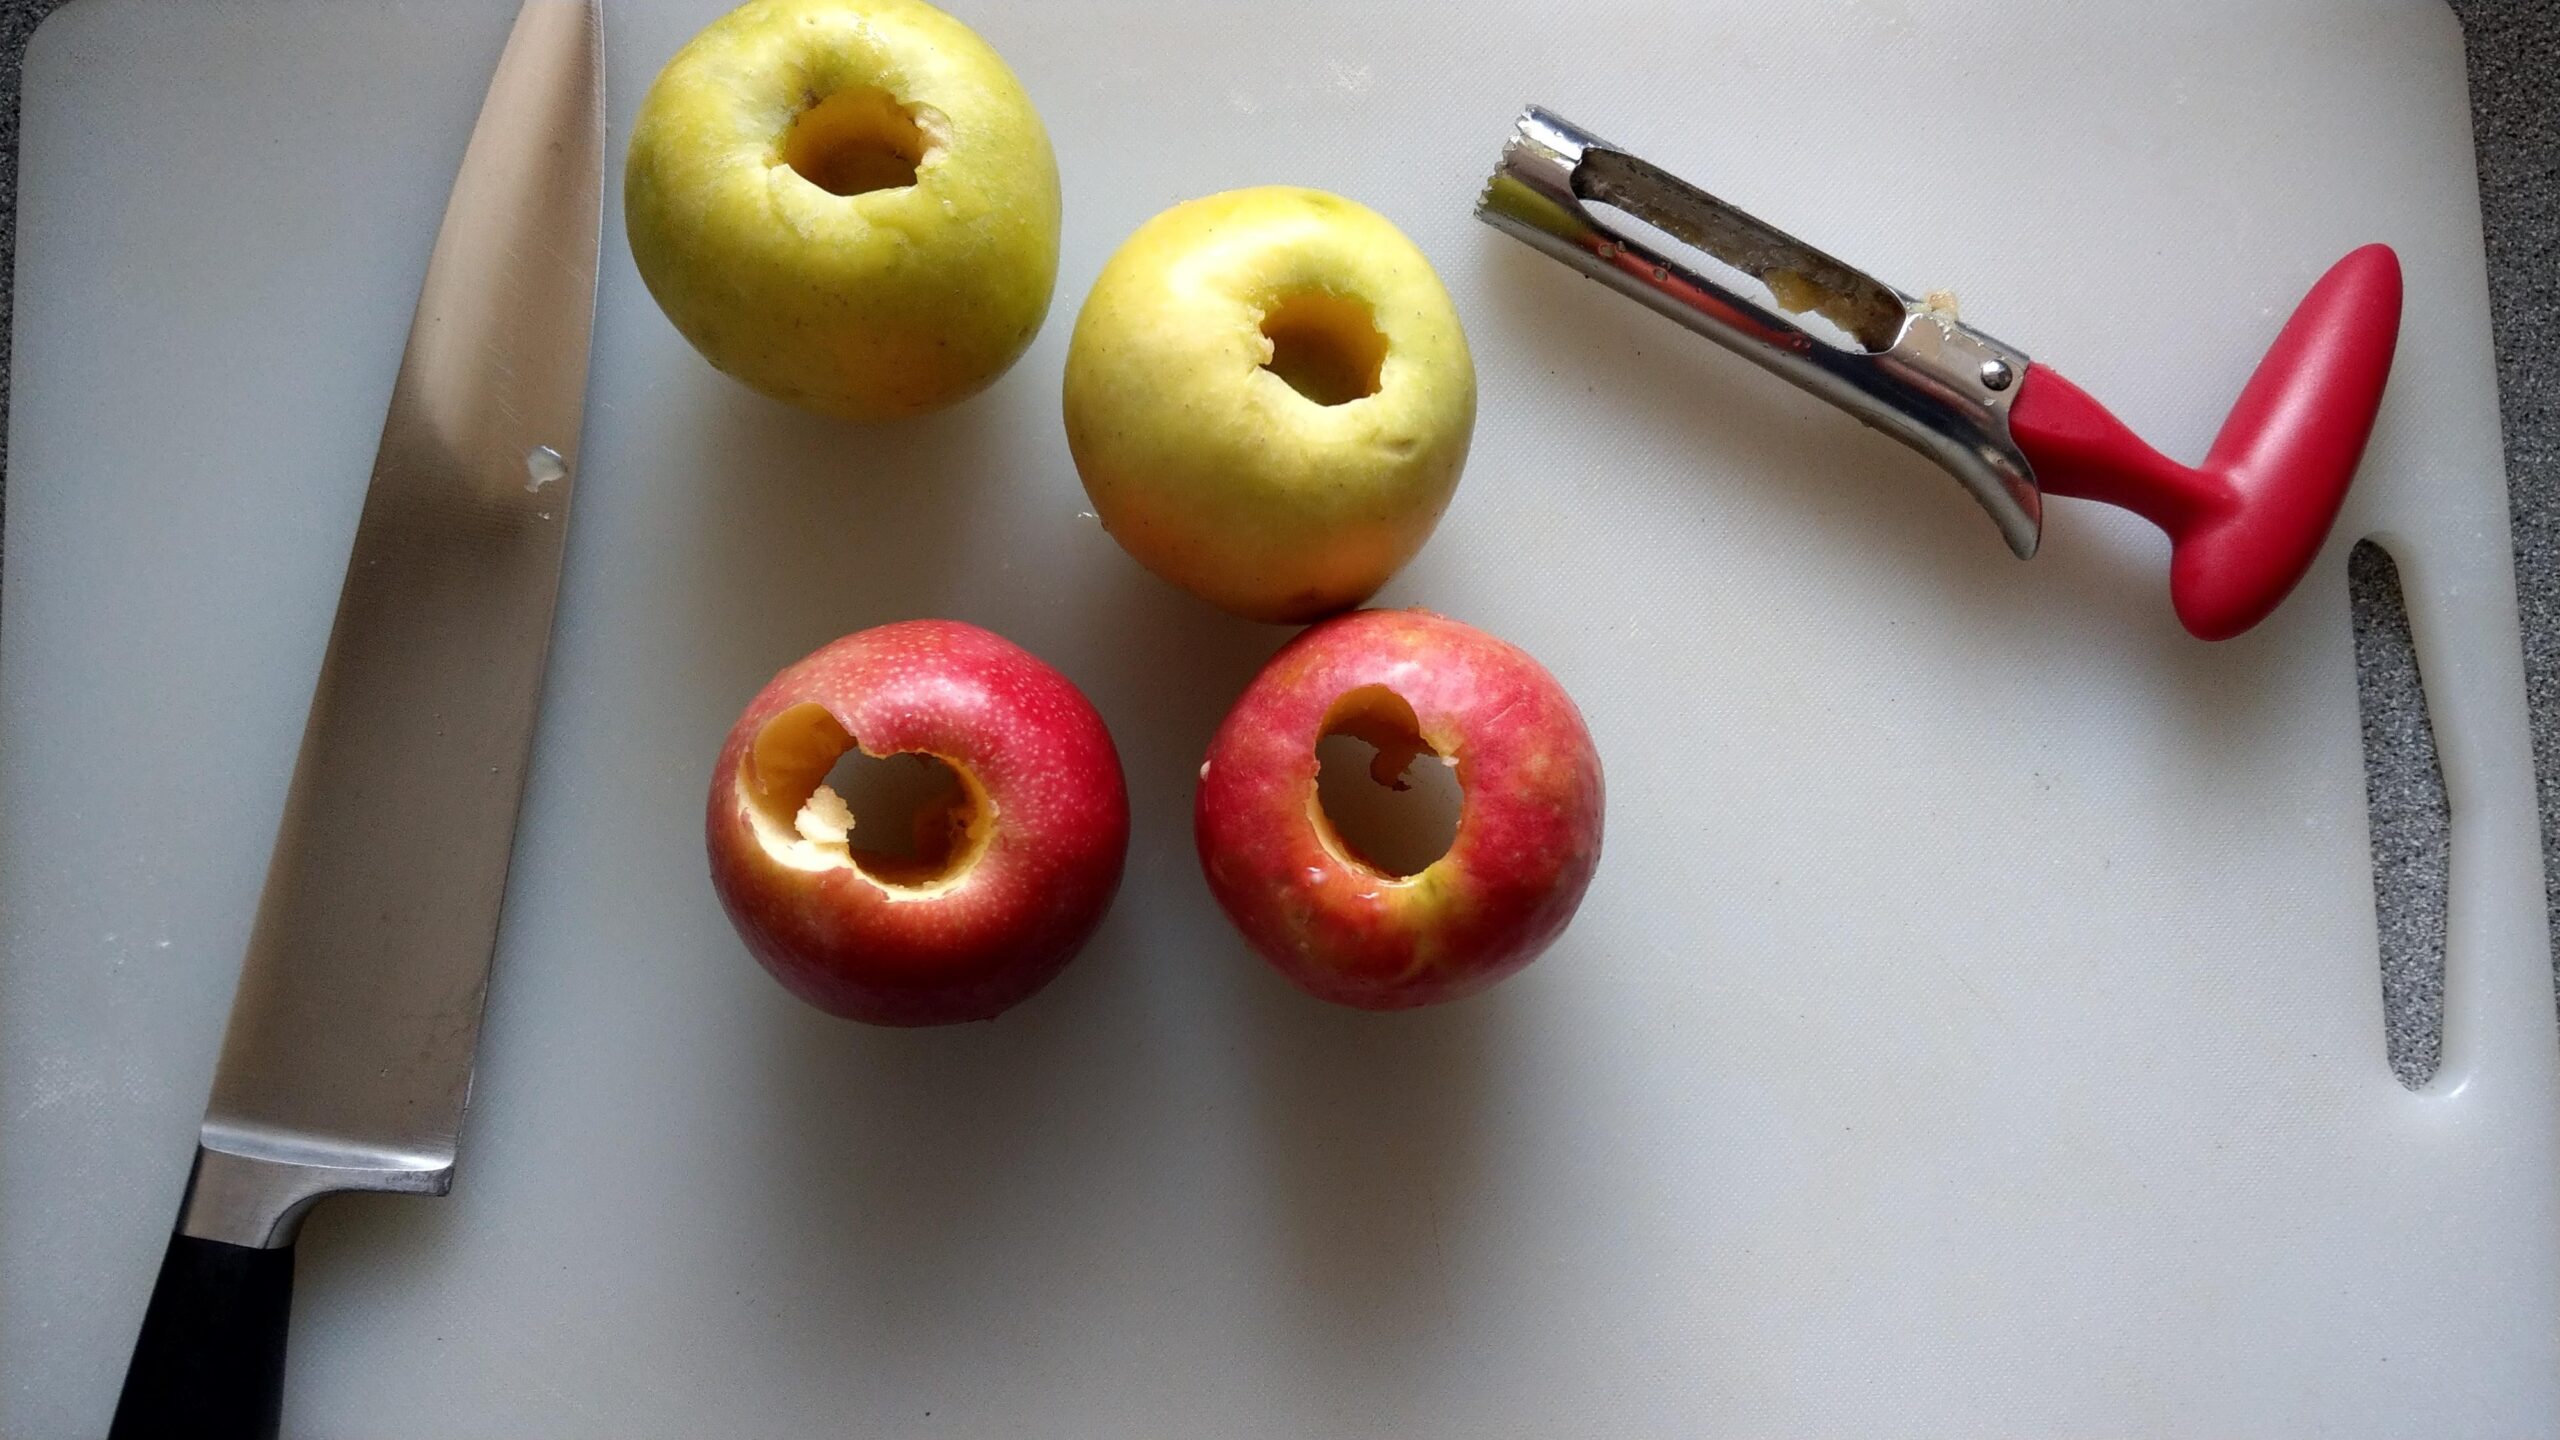 Cored apples